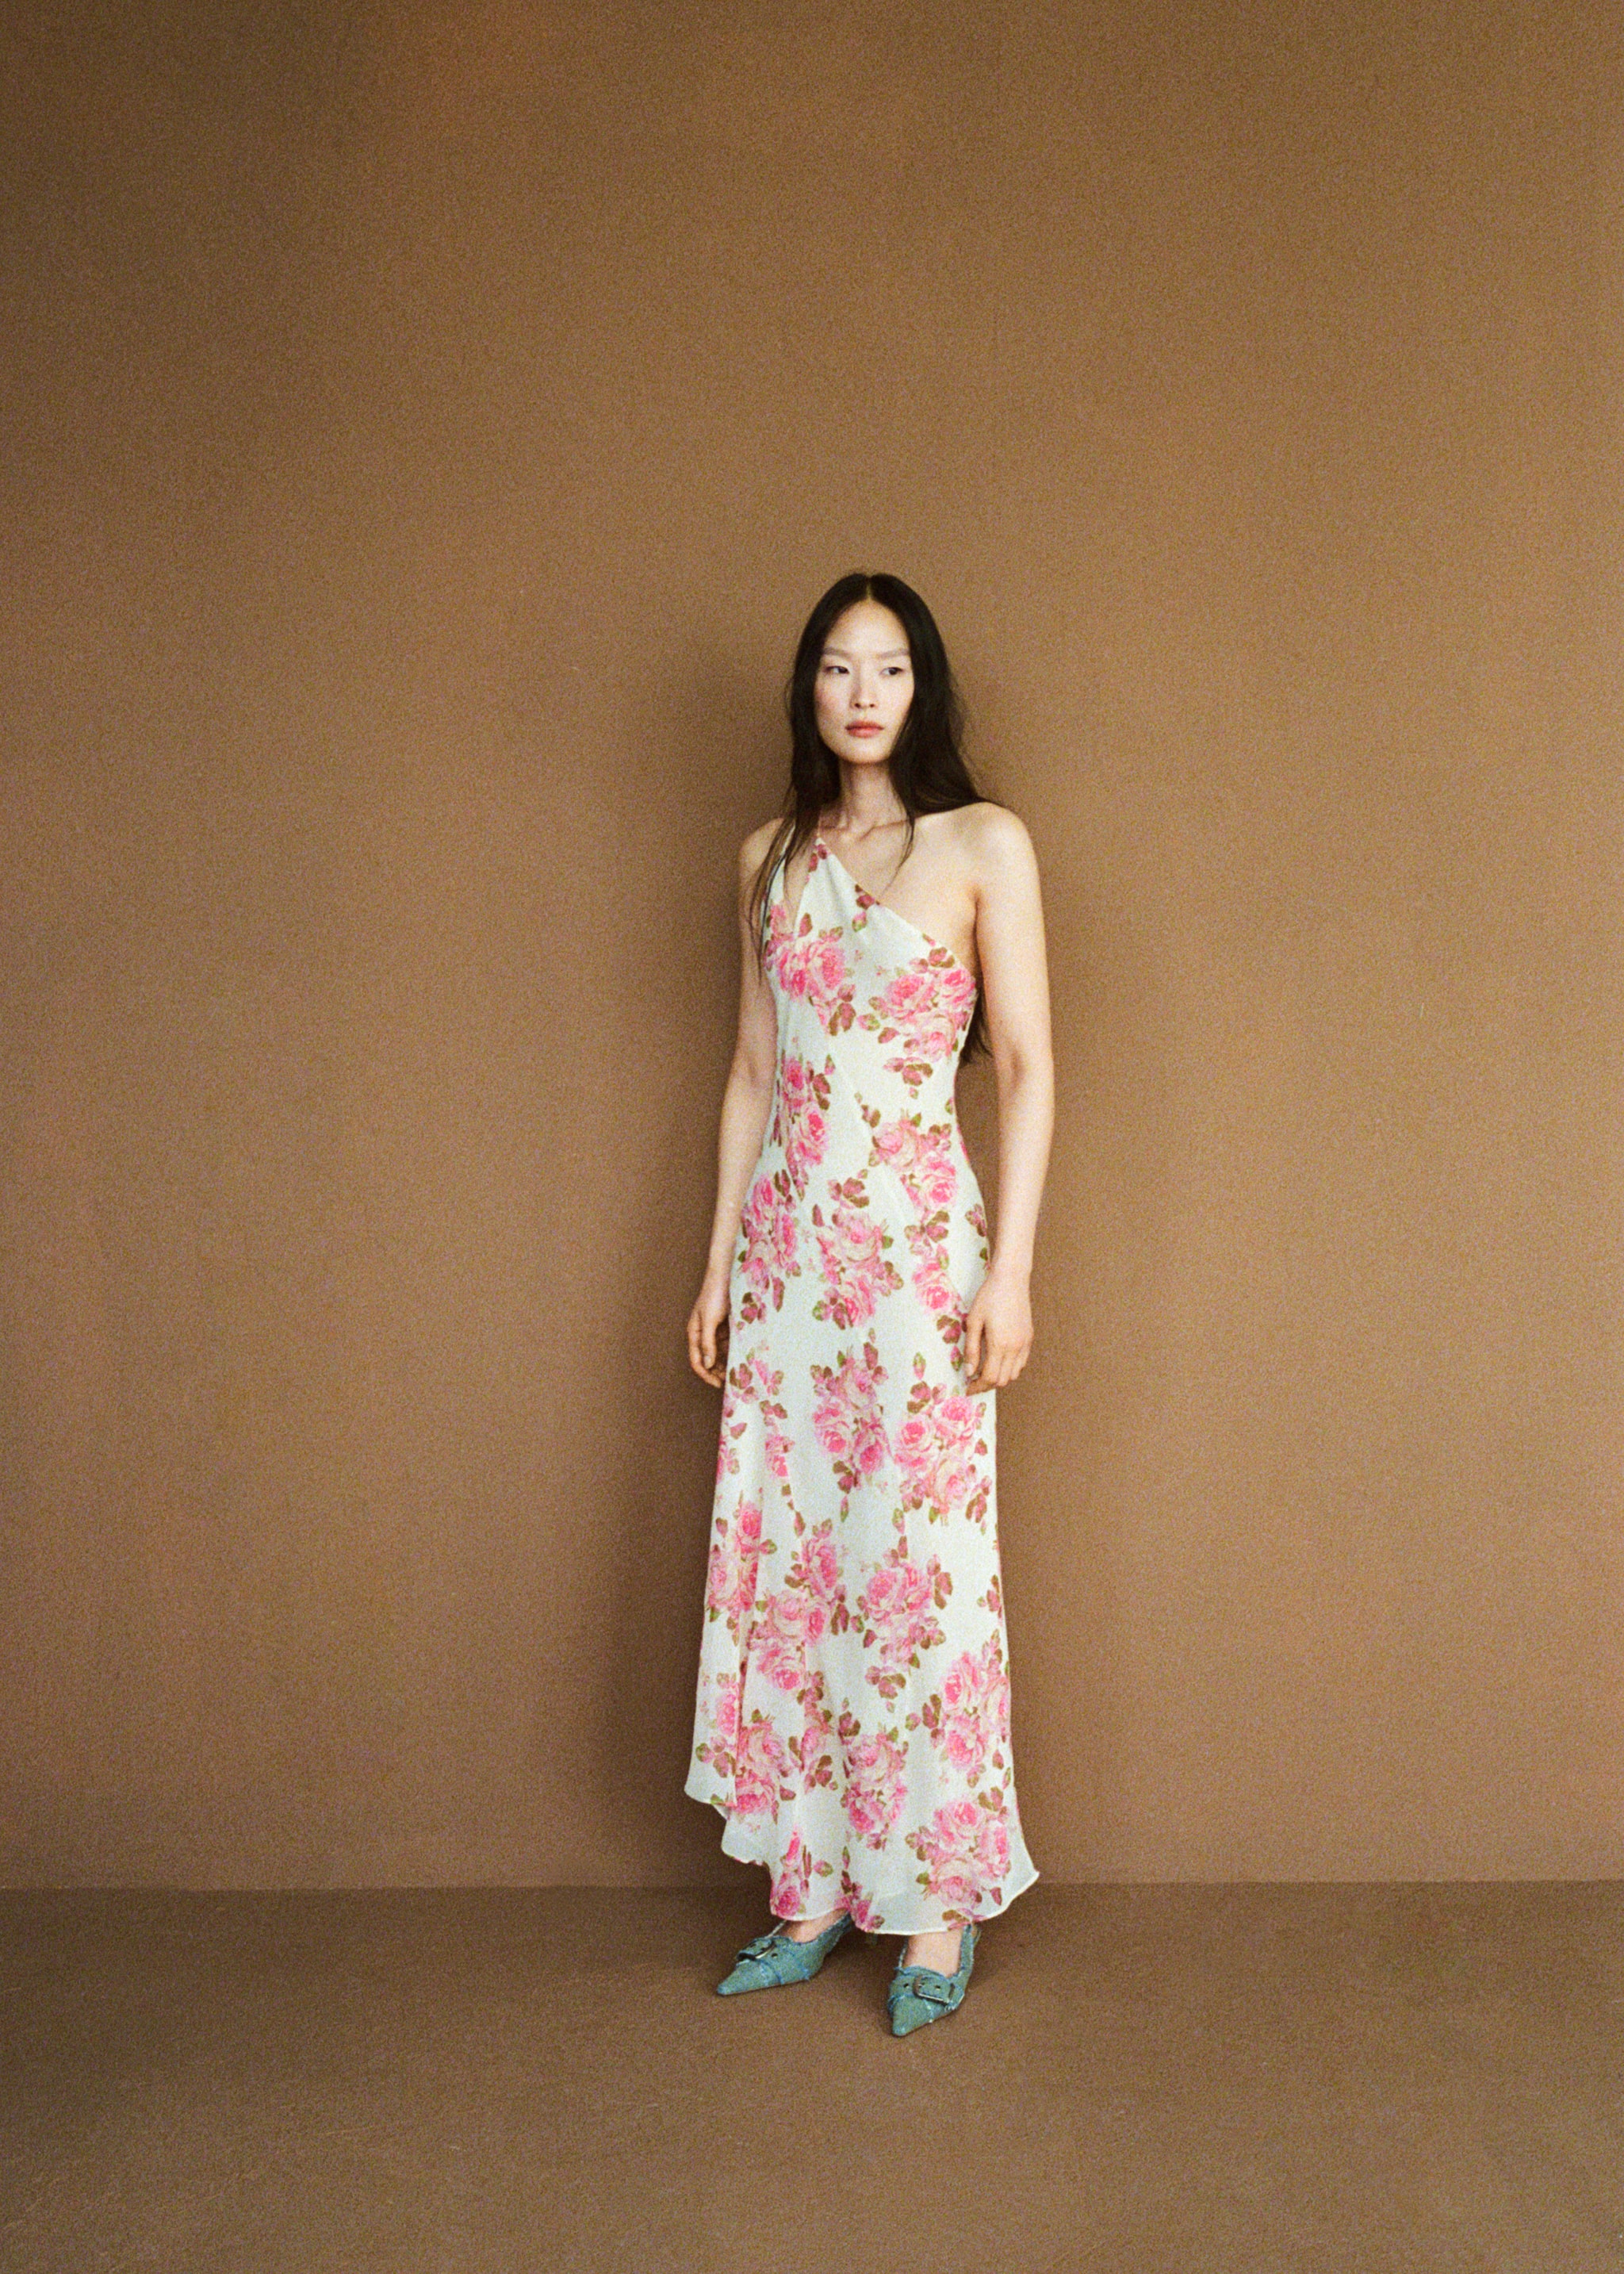 Asymmetrical floral dress - Details of the article 6